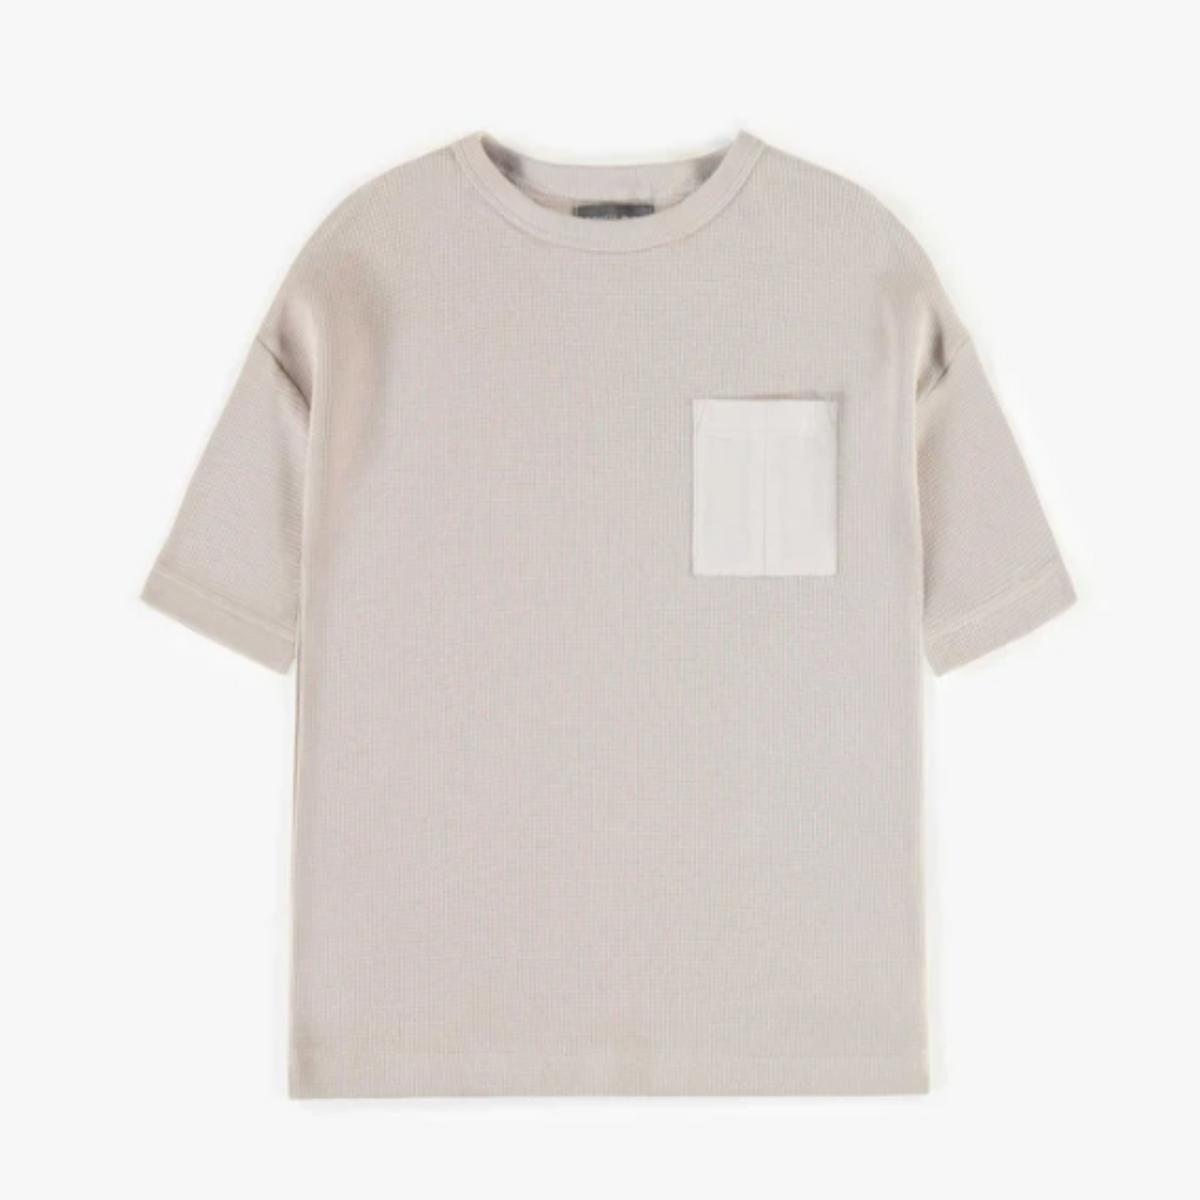 Grey T-shirt with short sleeves in embossed jersey, child